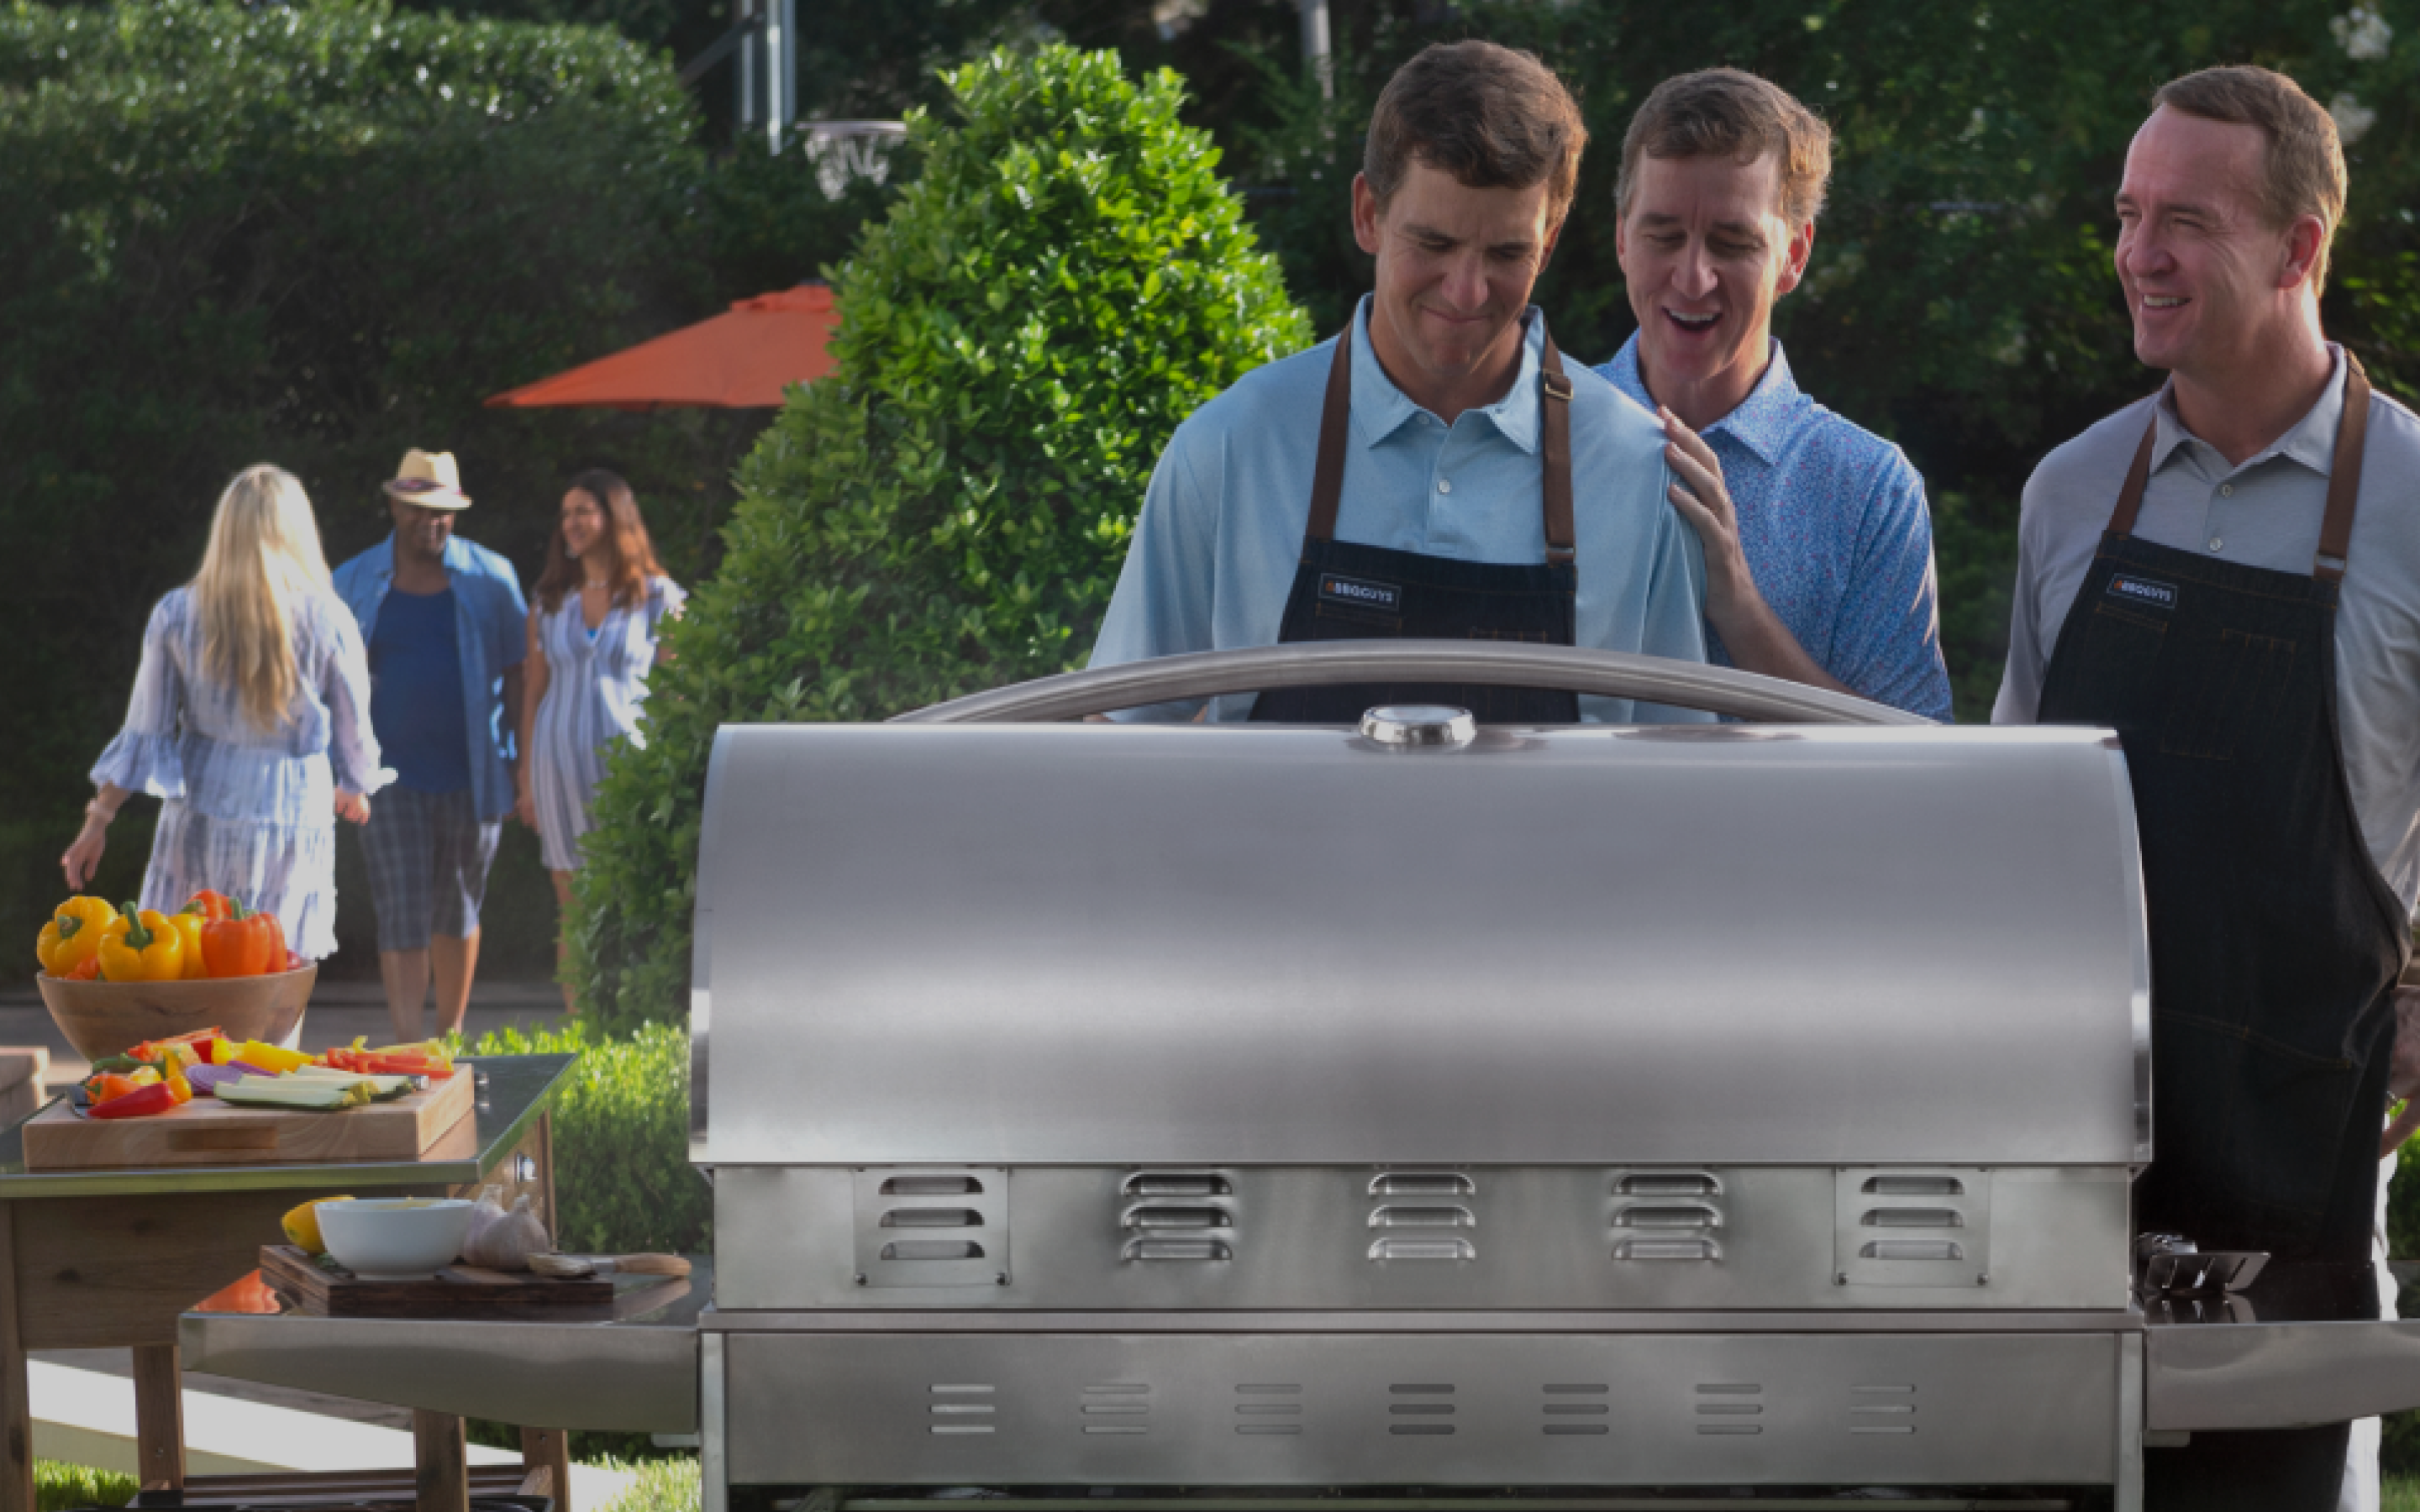 The Manning family standing over a grill.